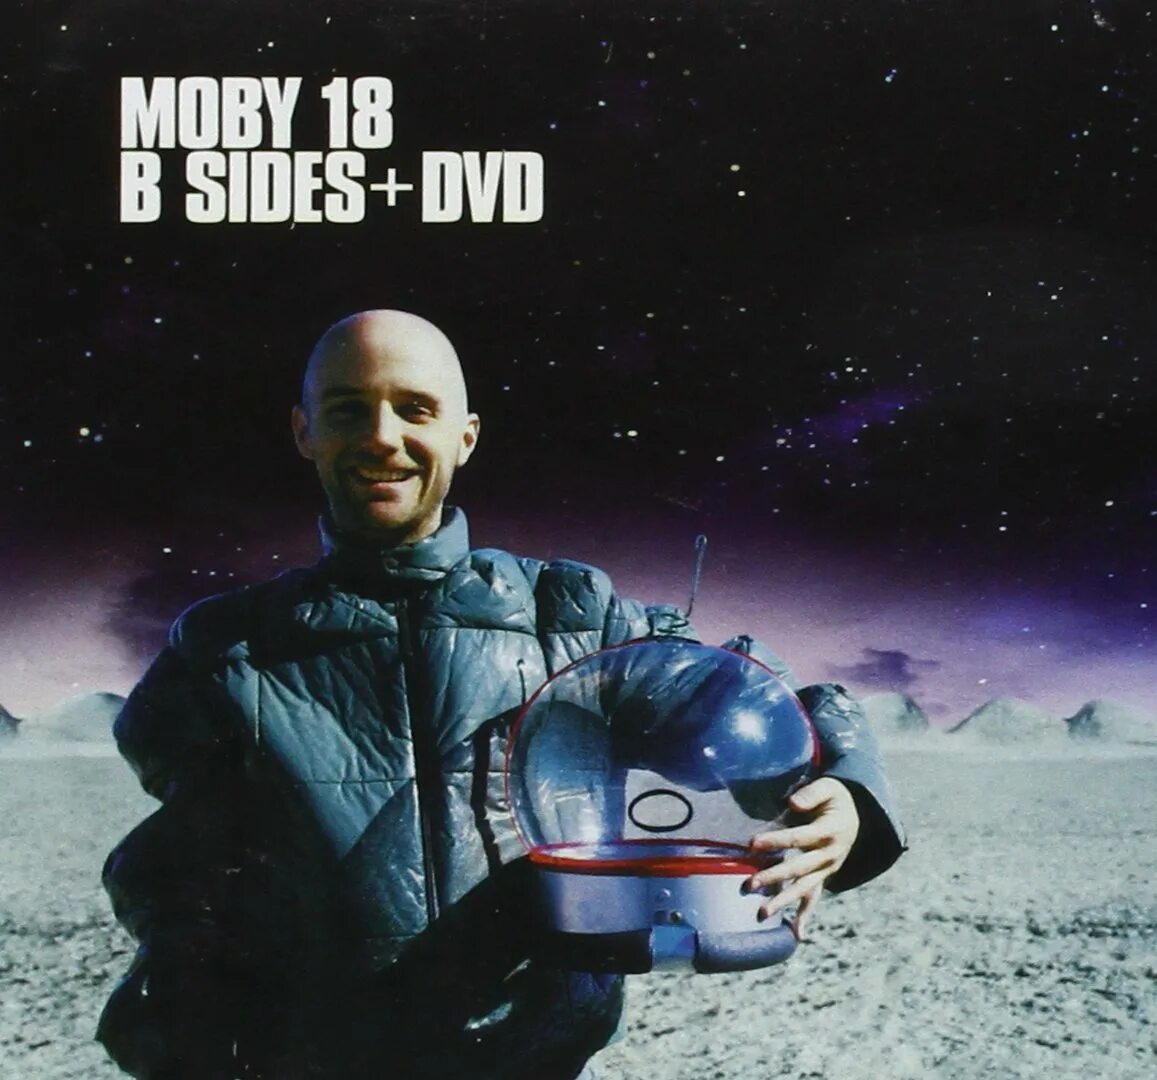 Moby play. Moby 18 2002. Moby обложки альбомов. Moby 1999. Moby 18 альбом.